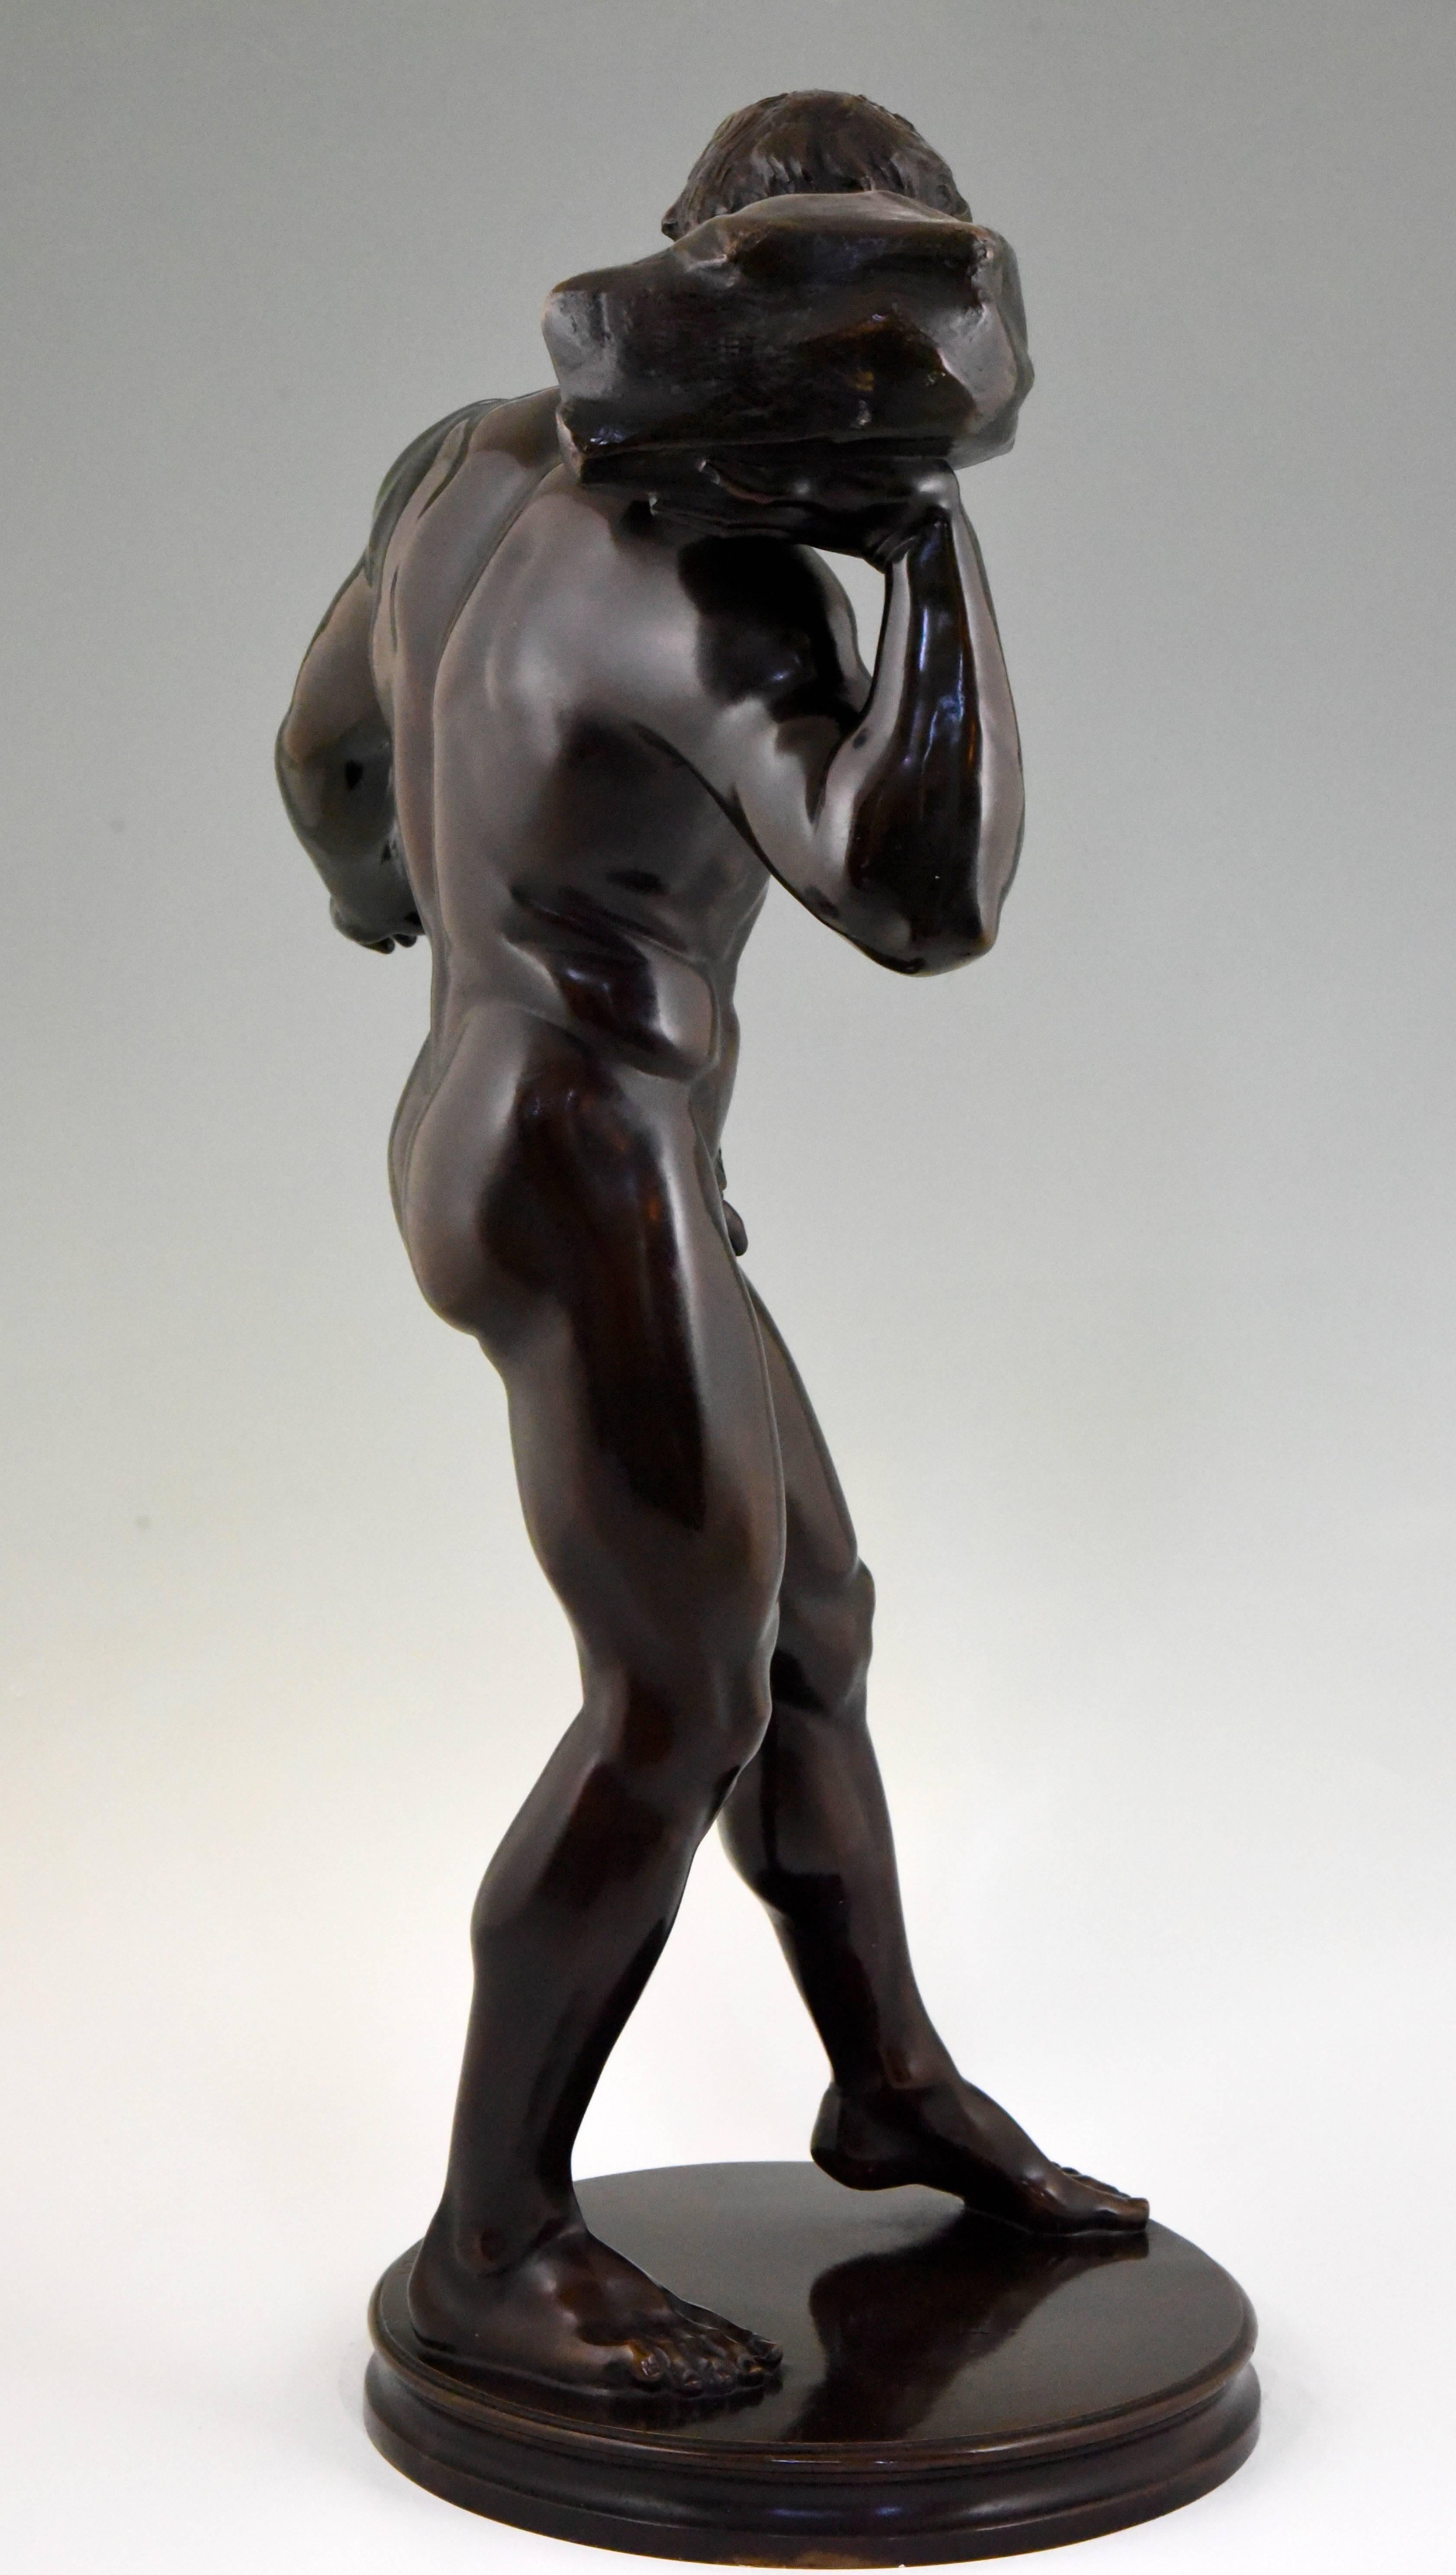 Patinated Antique Sculpture of a Male Nude Athlete Georg Kemper H. 34 inch Germany, 1900